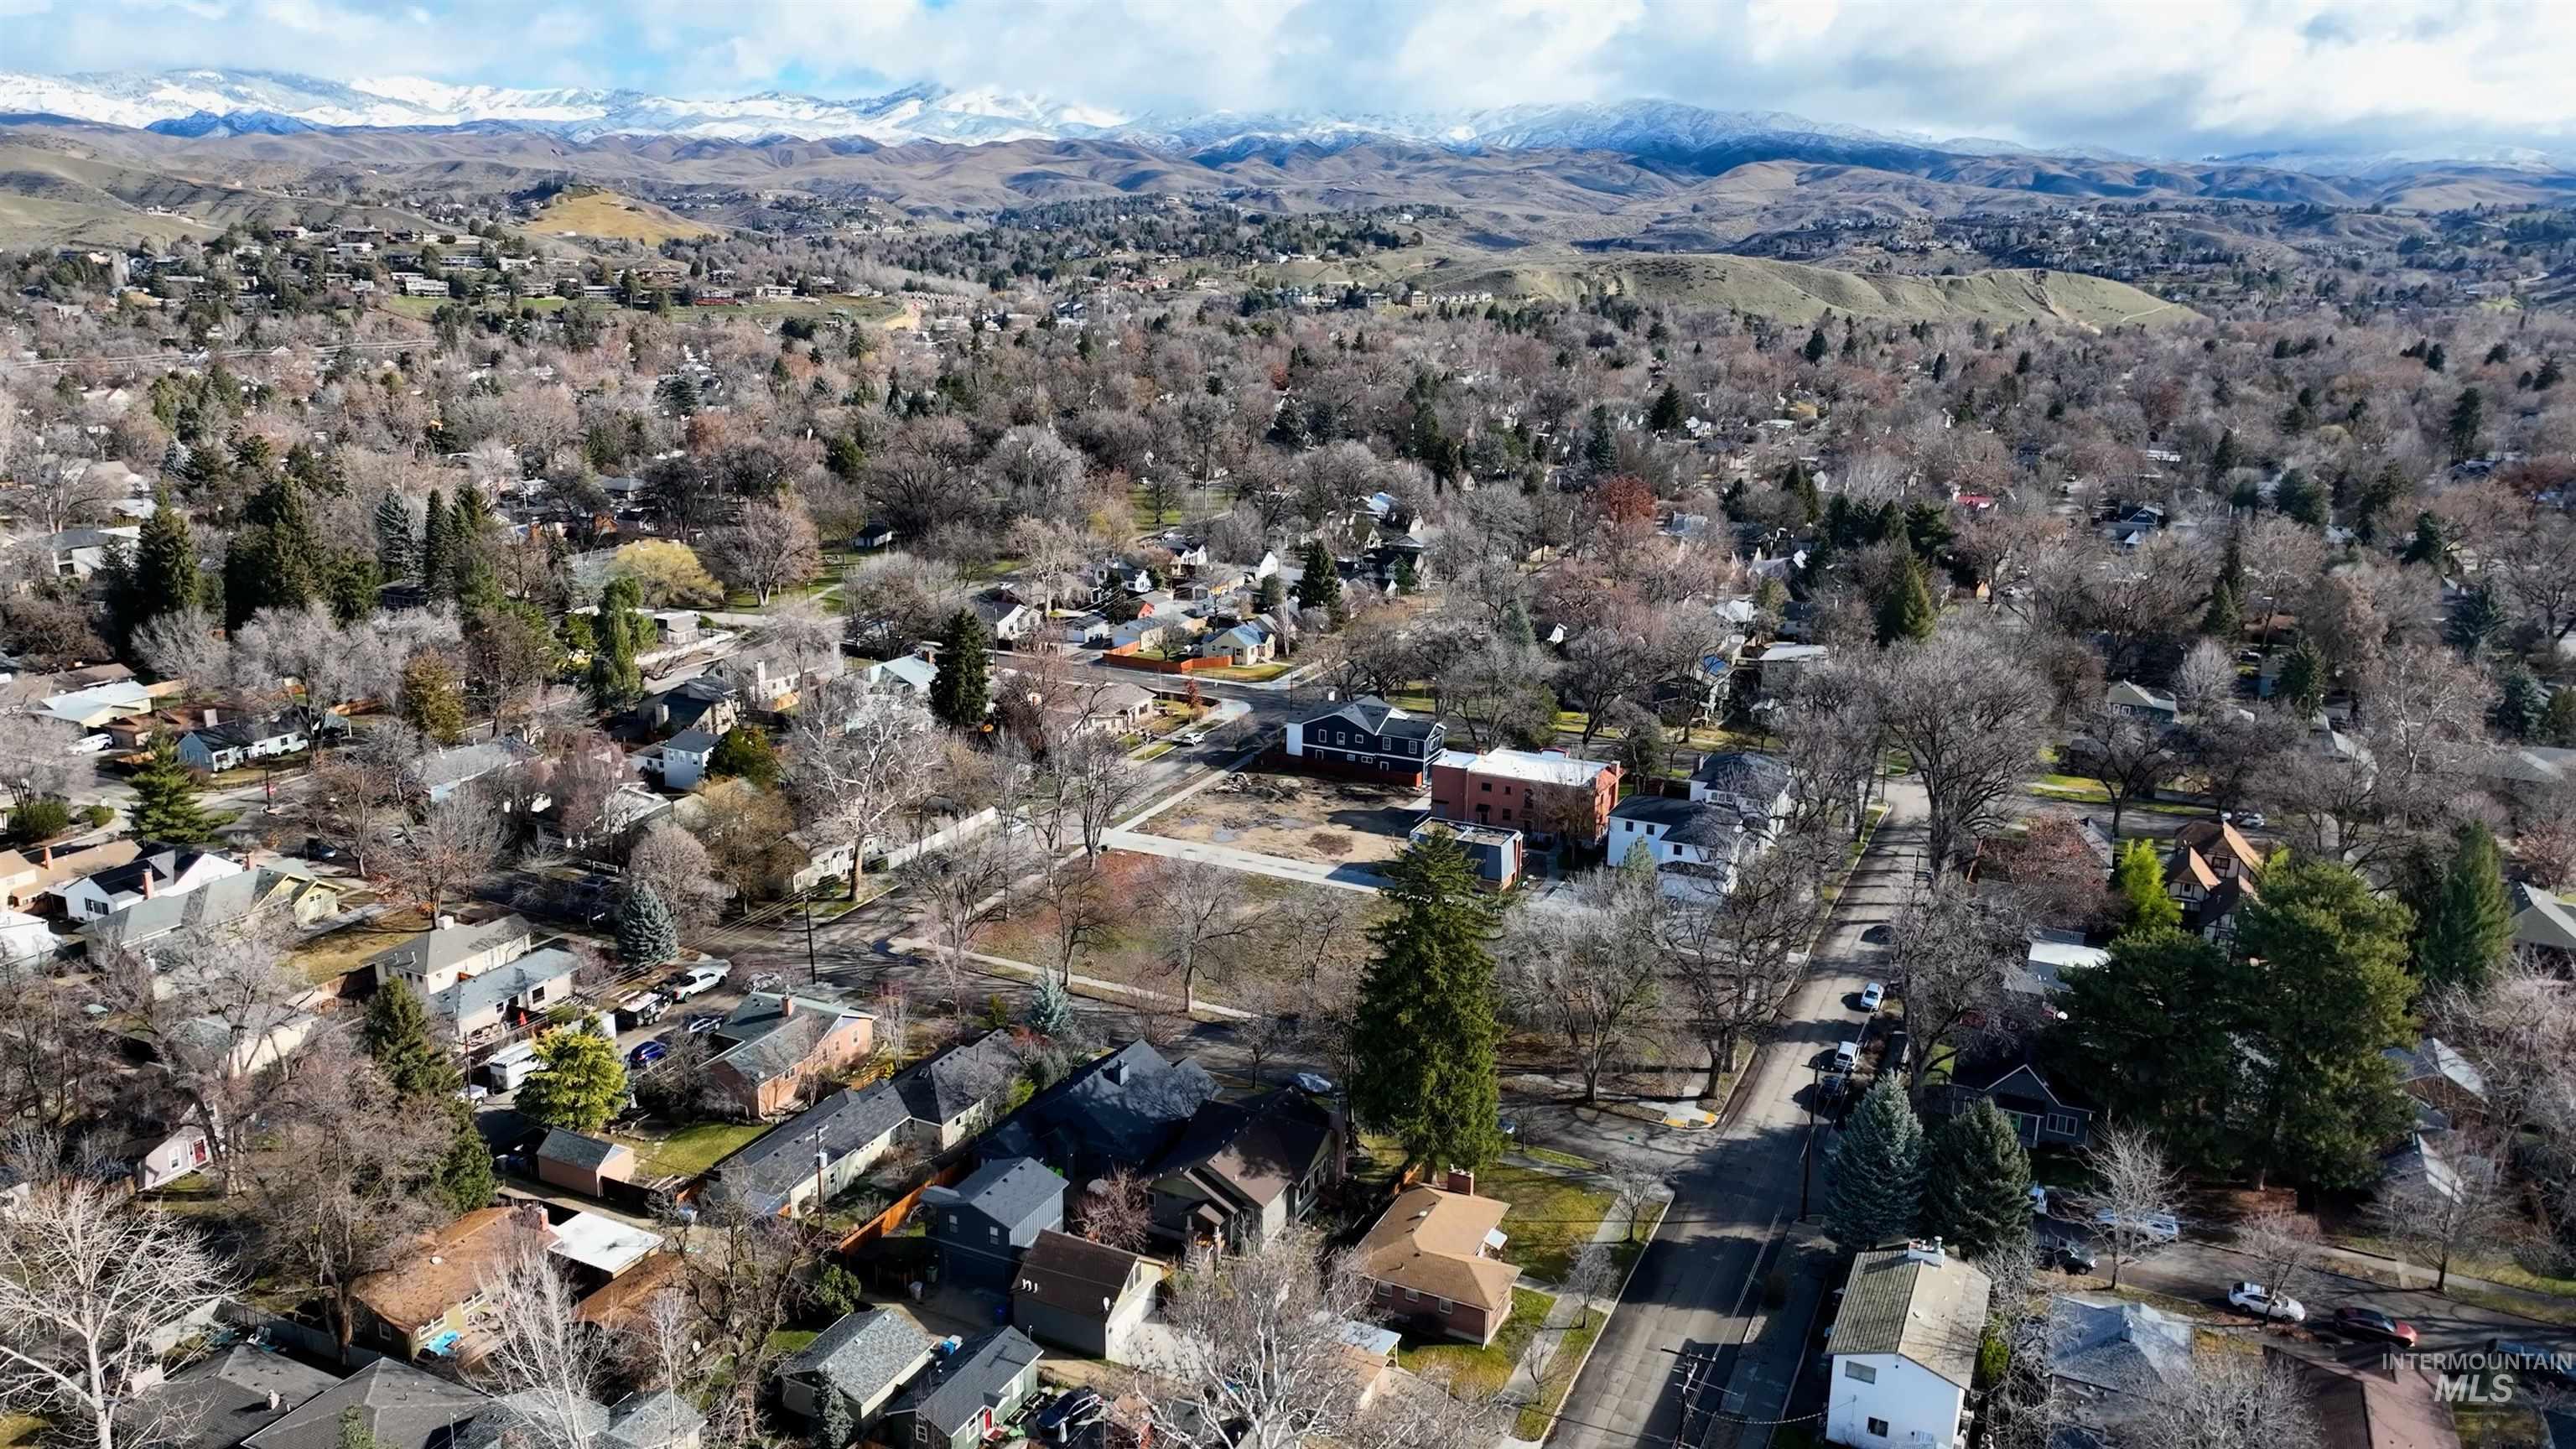 1610 N 25th St., Boise, Idaho 83702, Land For Sale, Price $495,000,MLS 98902343